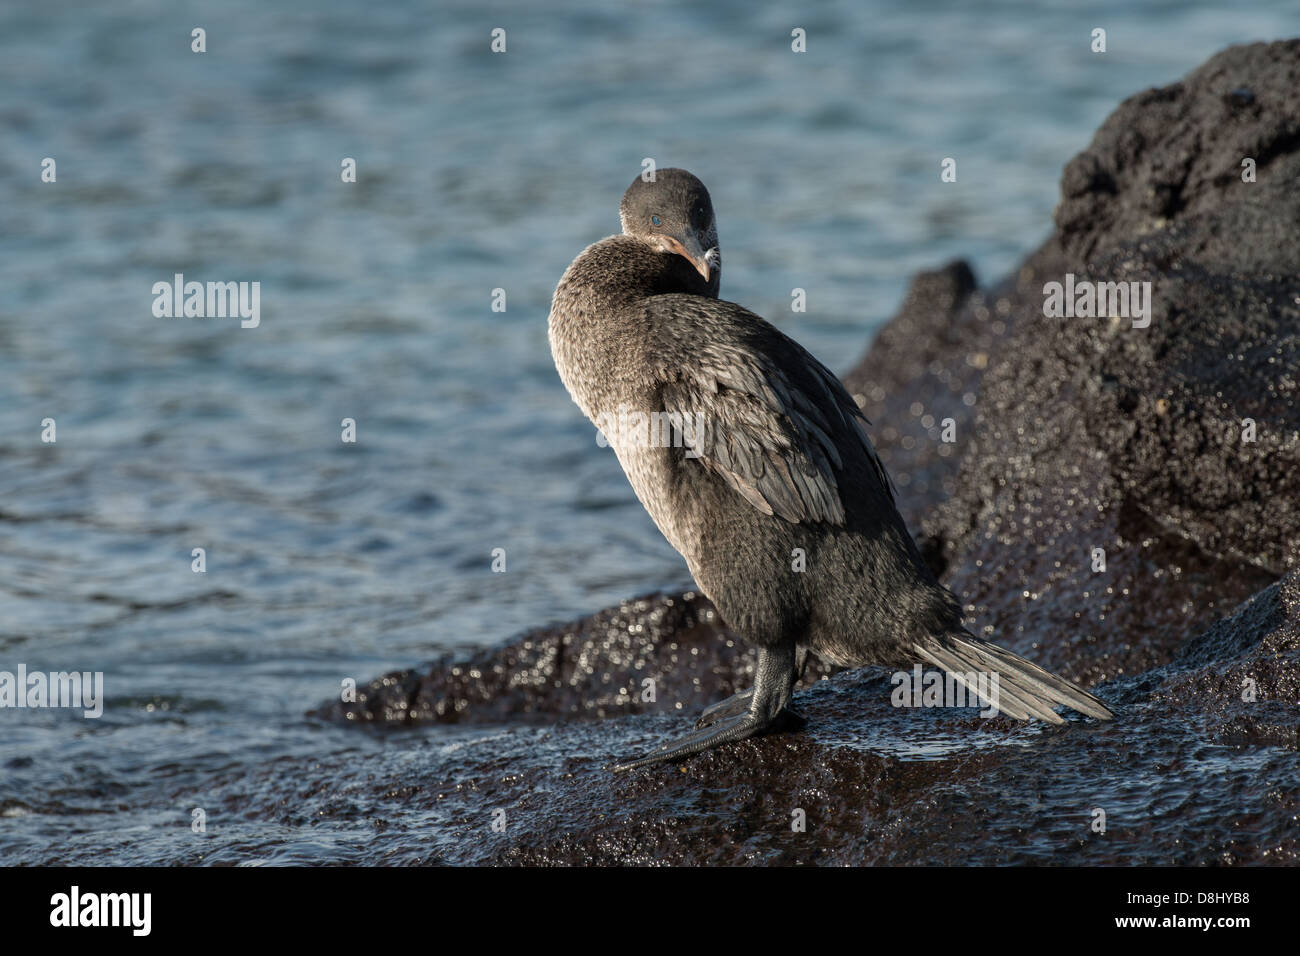 Stock photo of a flightless cormorant standing at the edge of the water, Fernandina Island, Galapagos Stock Photo